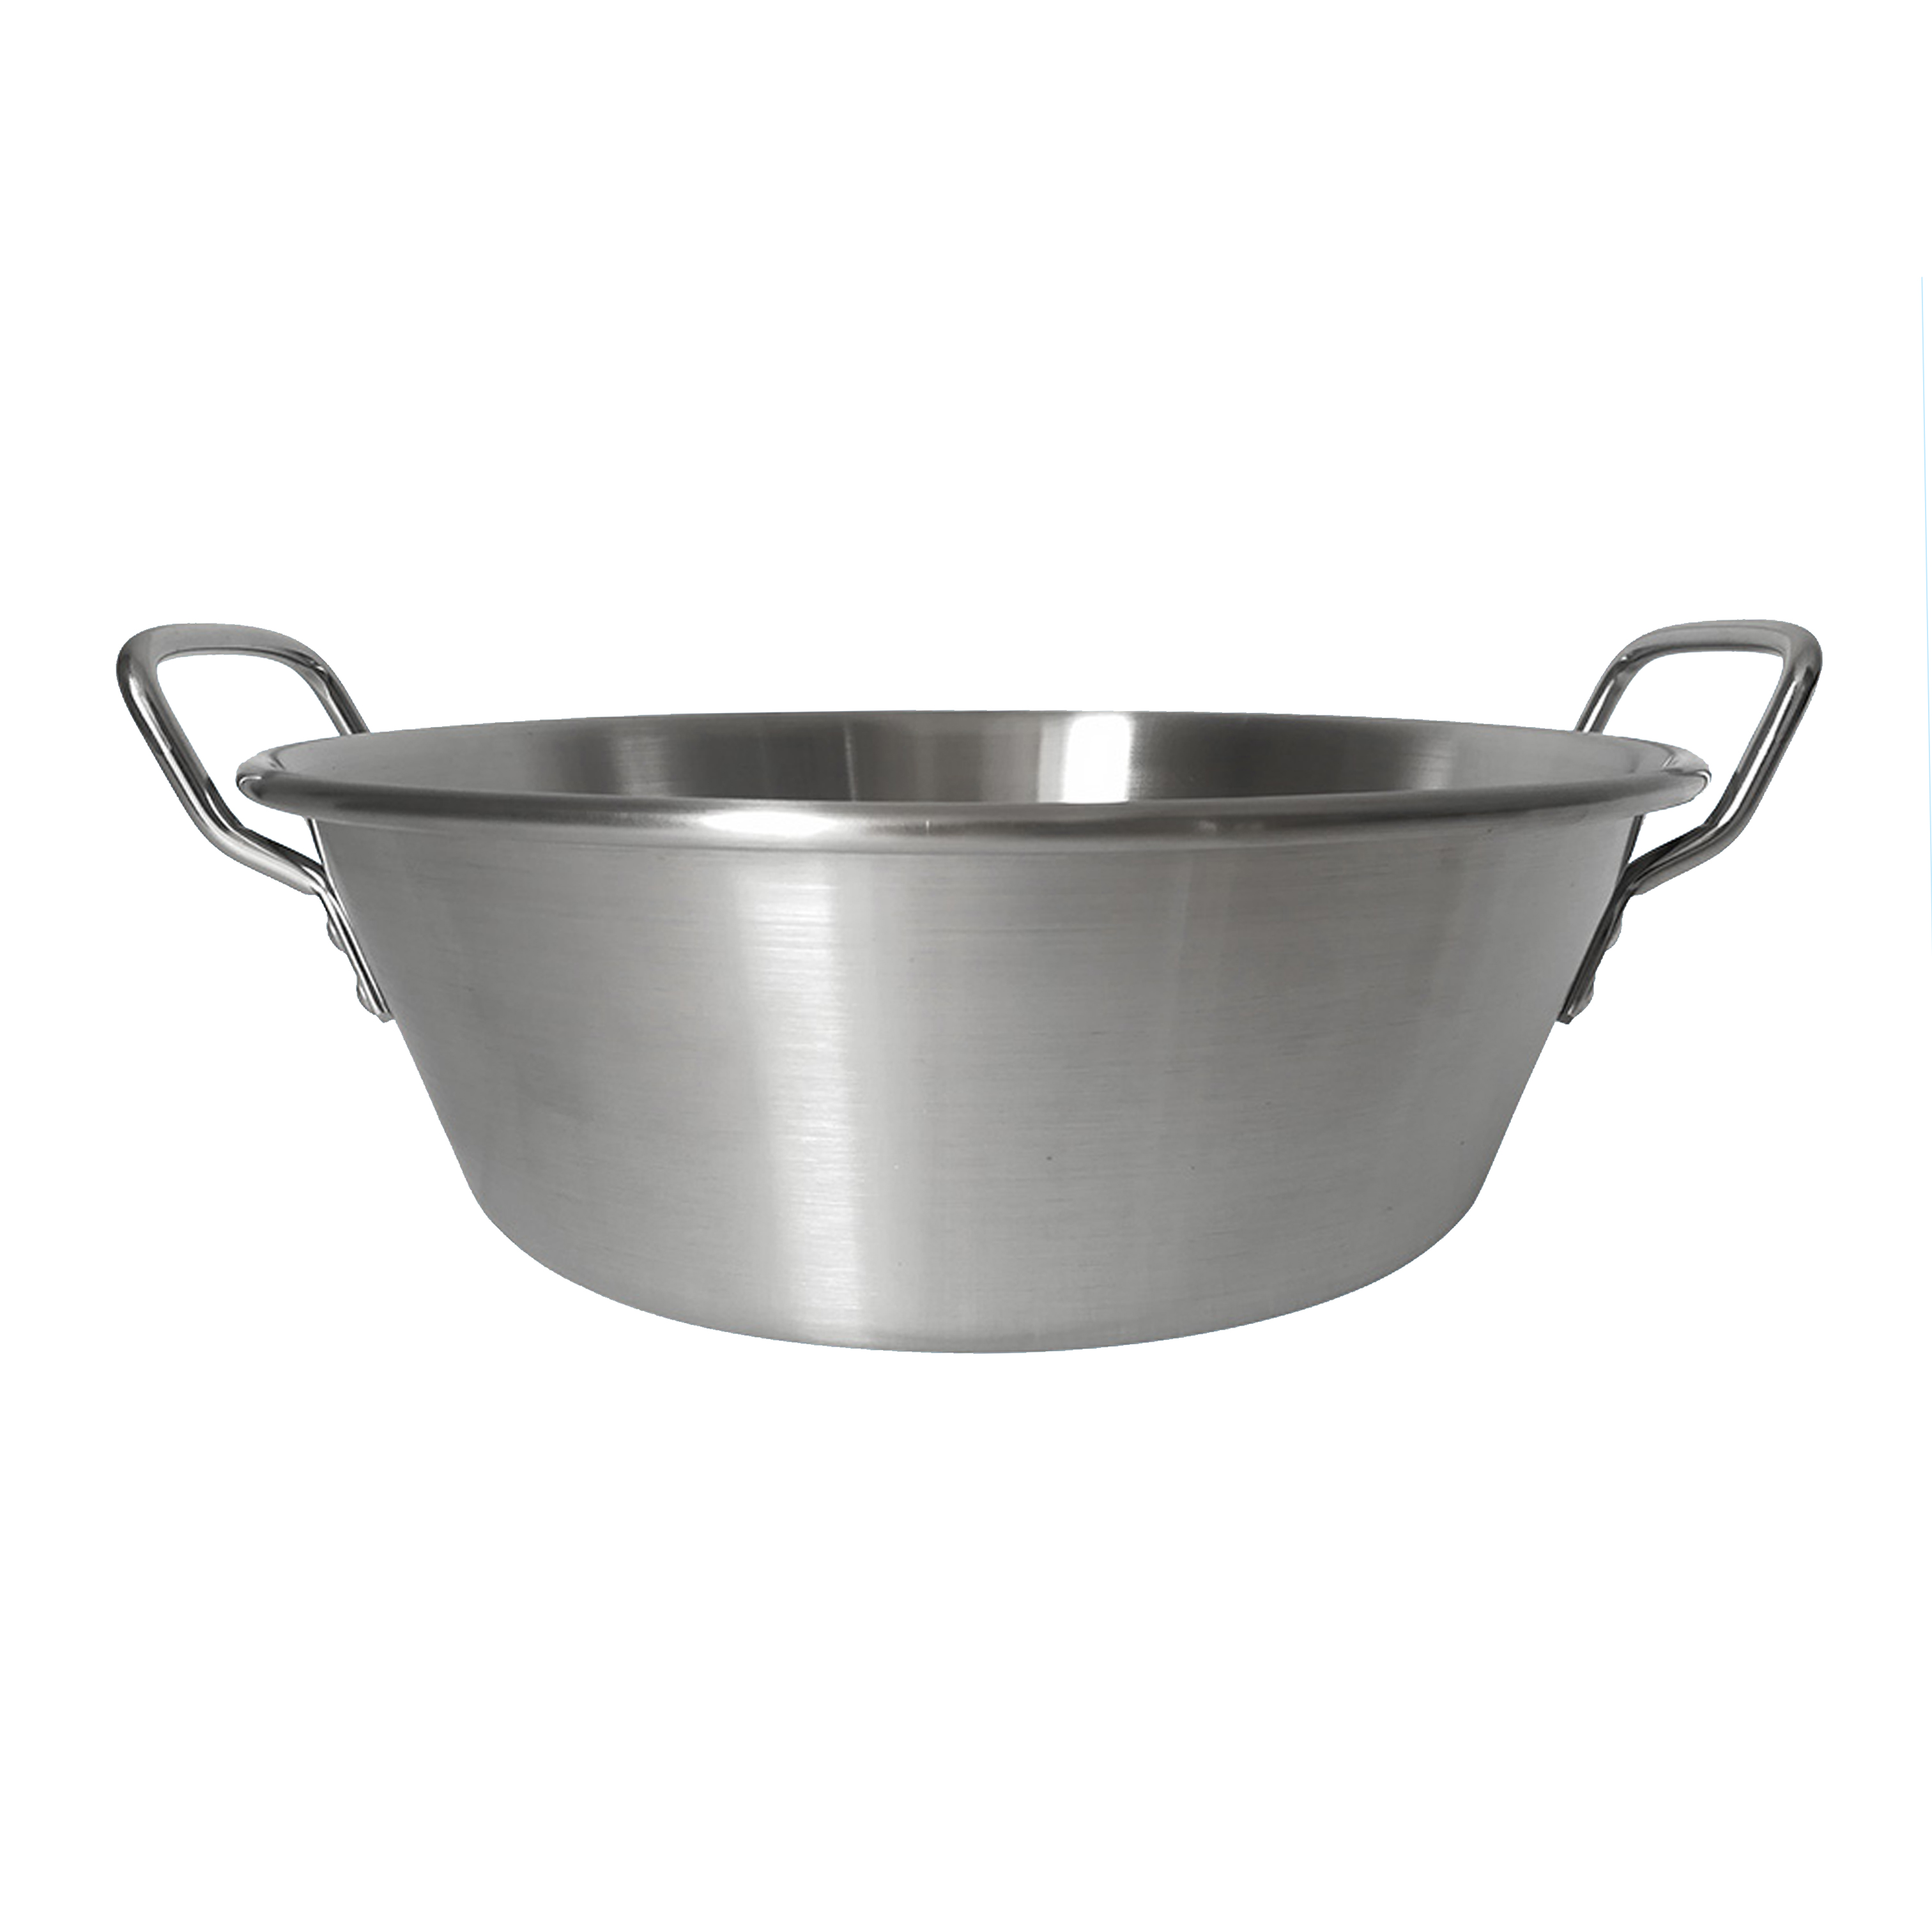 Factory Price Home Stainless Steel Round Silver Frying Baking Pan Sets